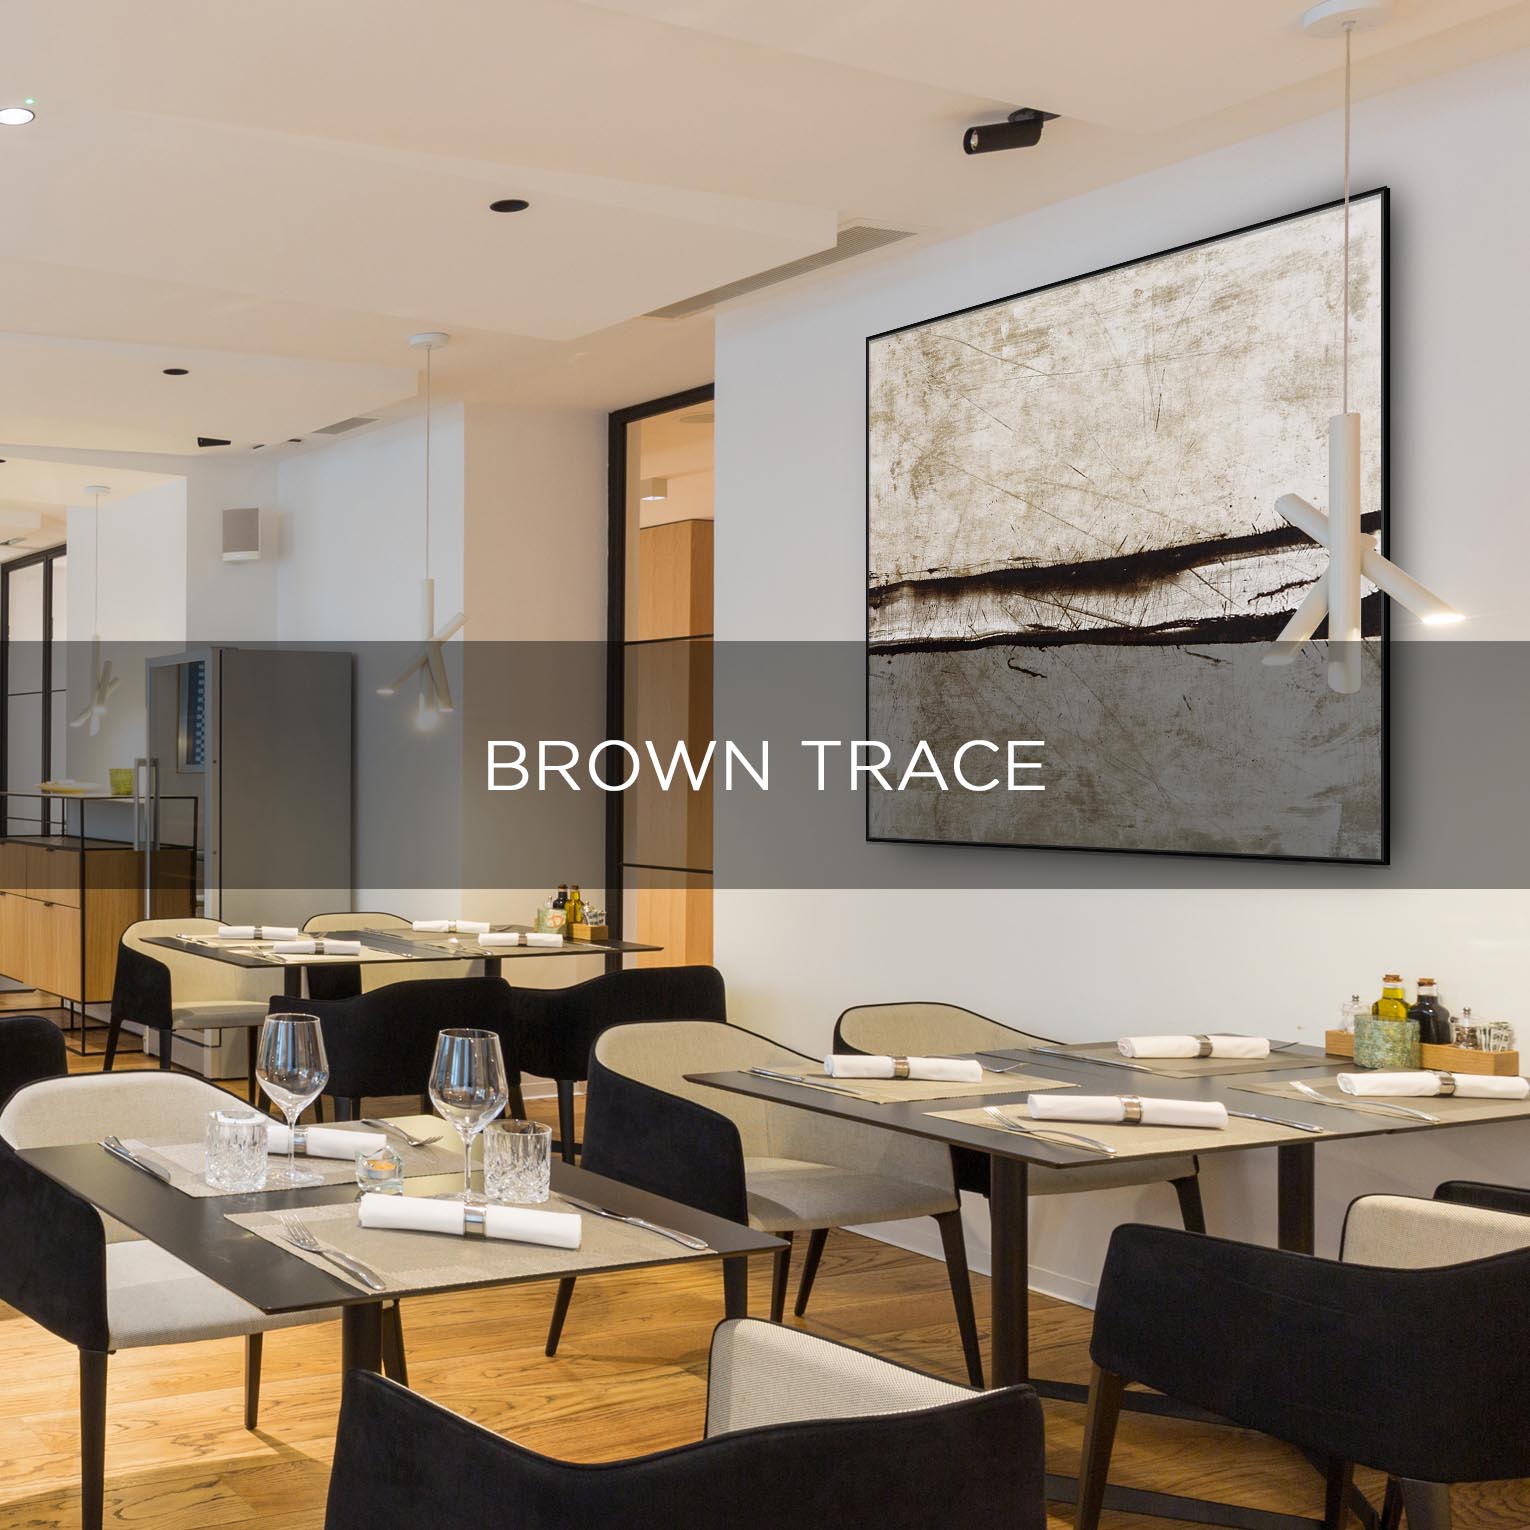 BROWN TRACE